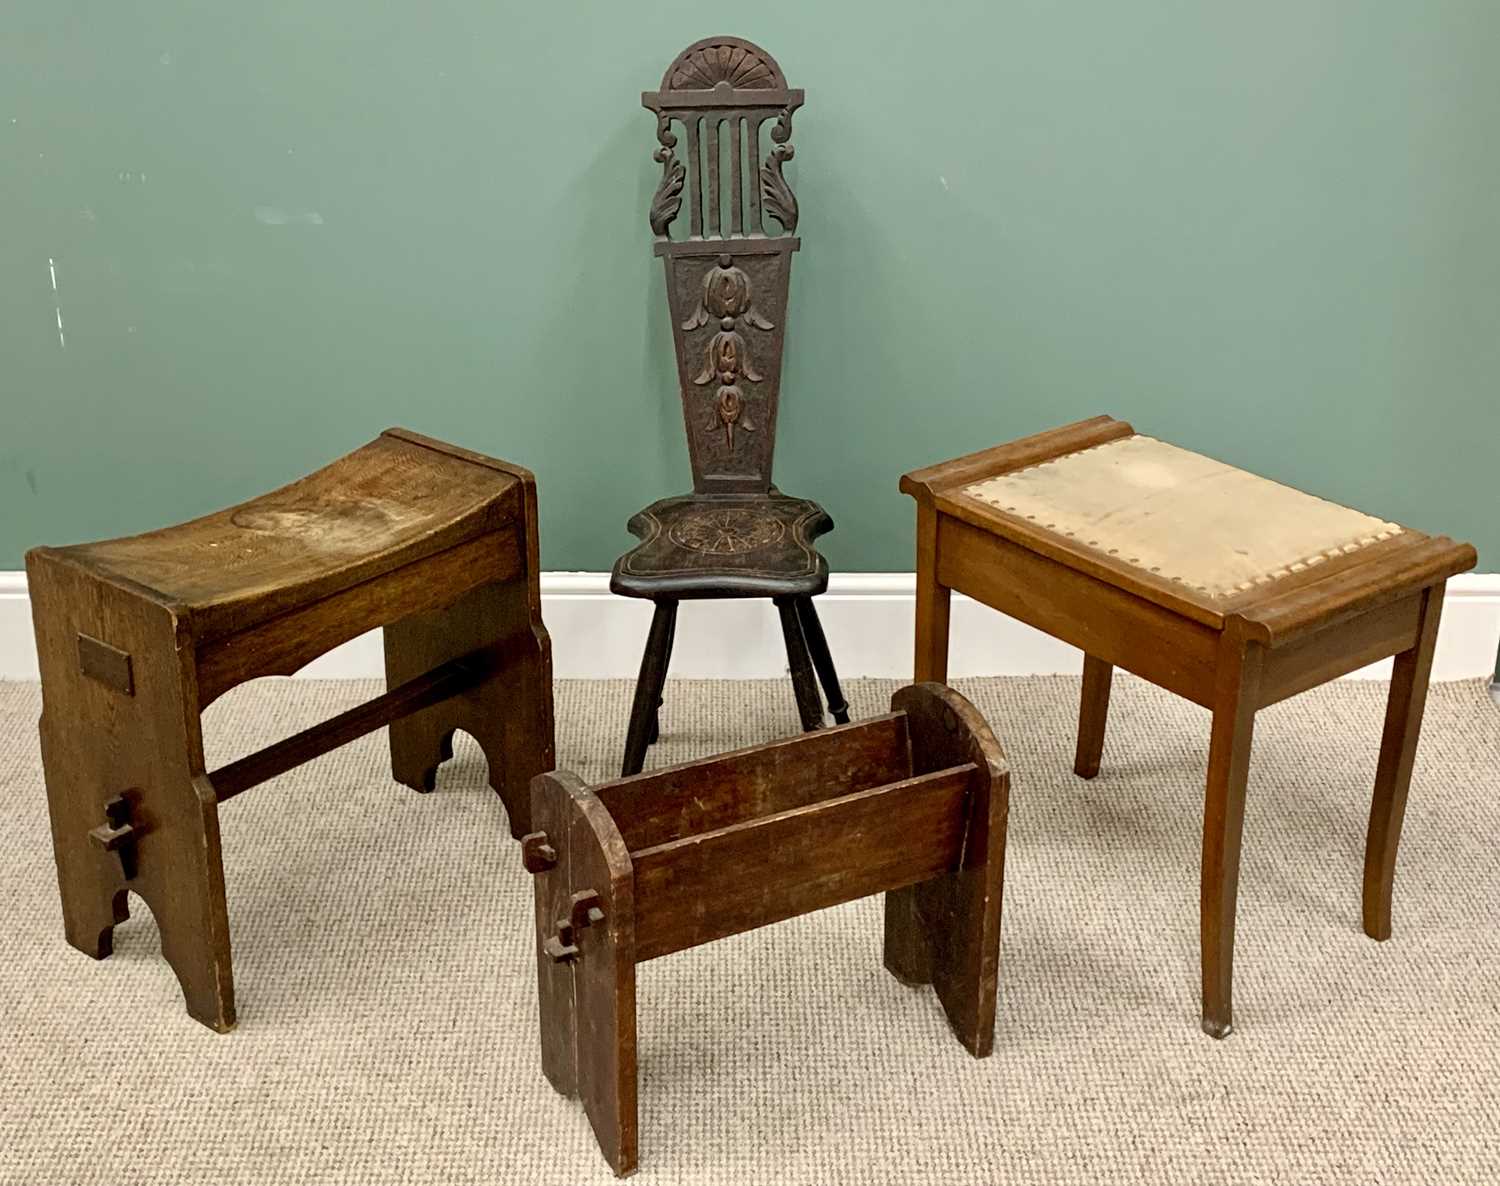 FURNITURE ASSORTMENT - to include piano stool, rustic oak stool, magazine rack and a spinning stool